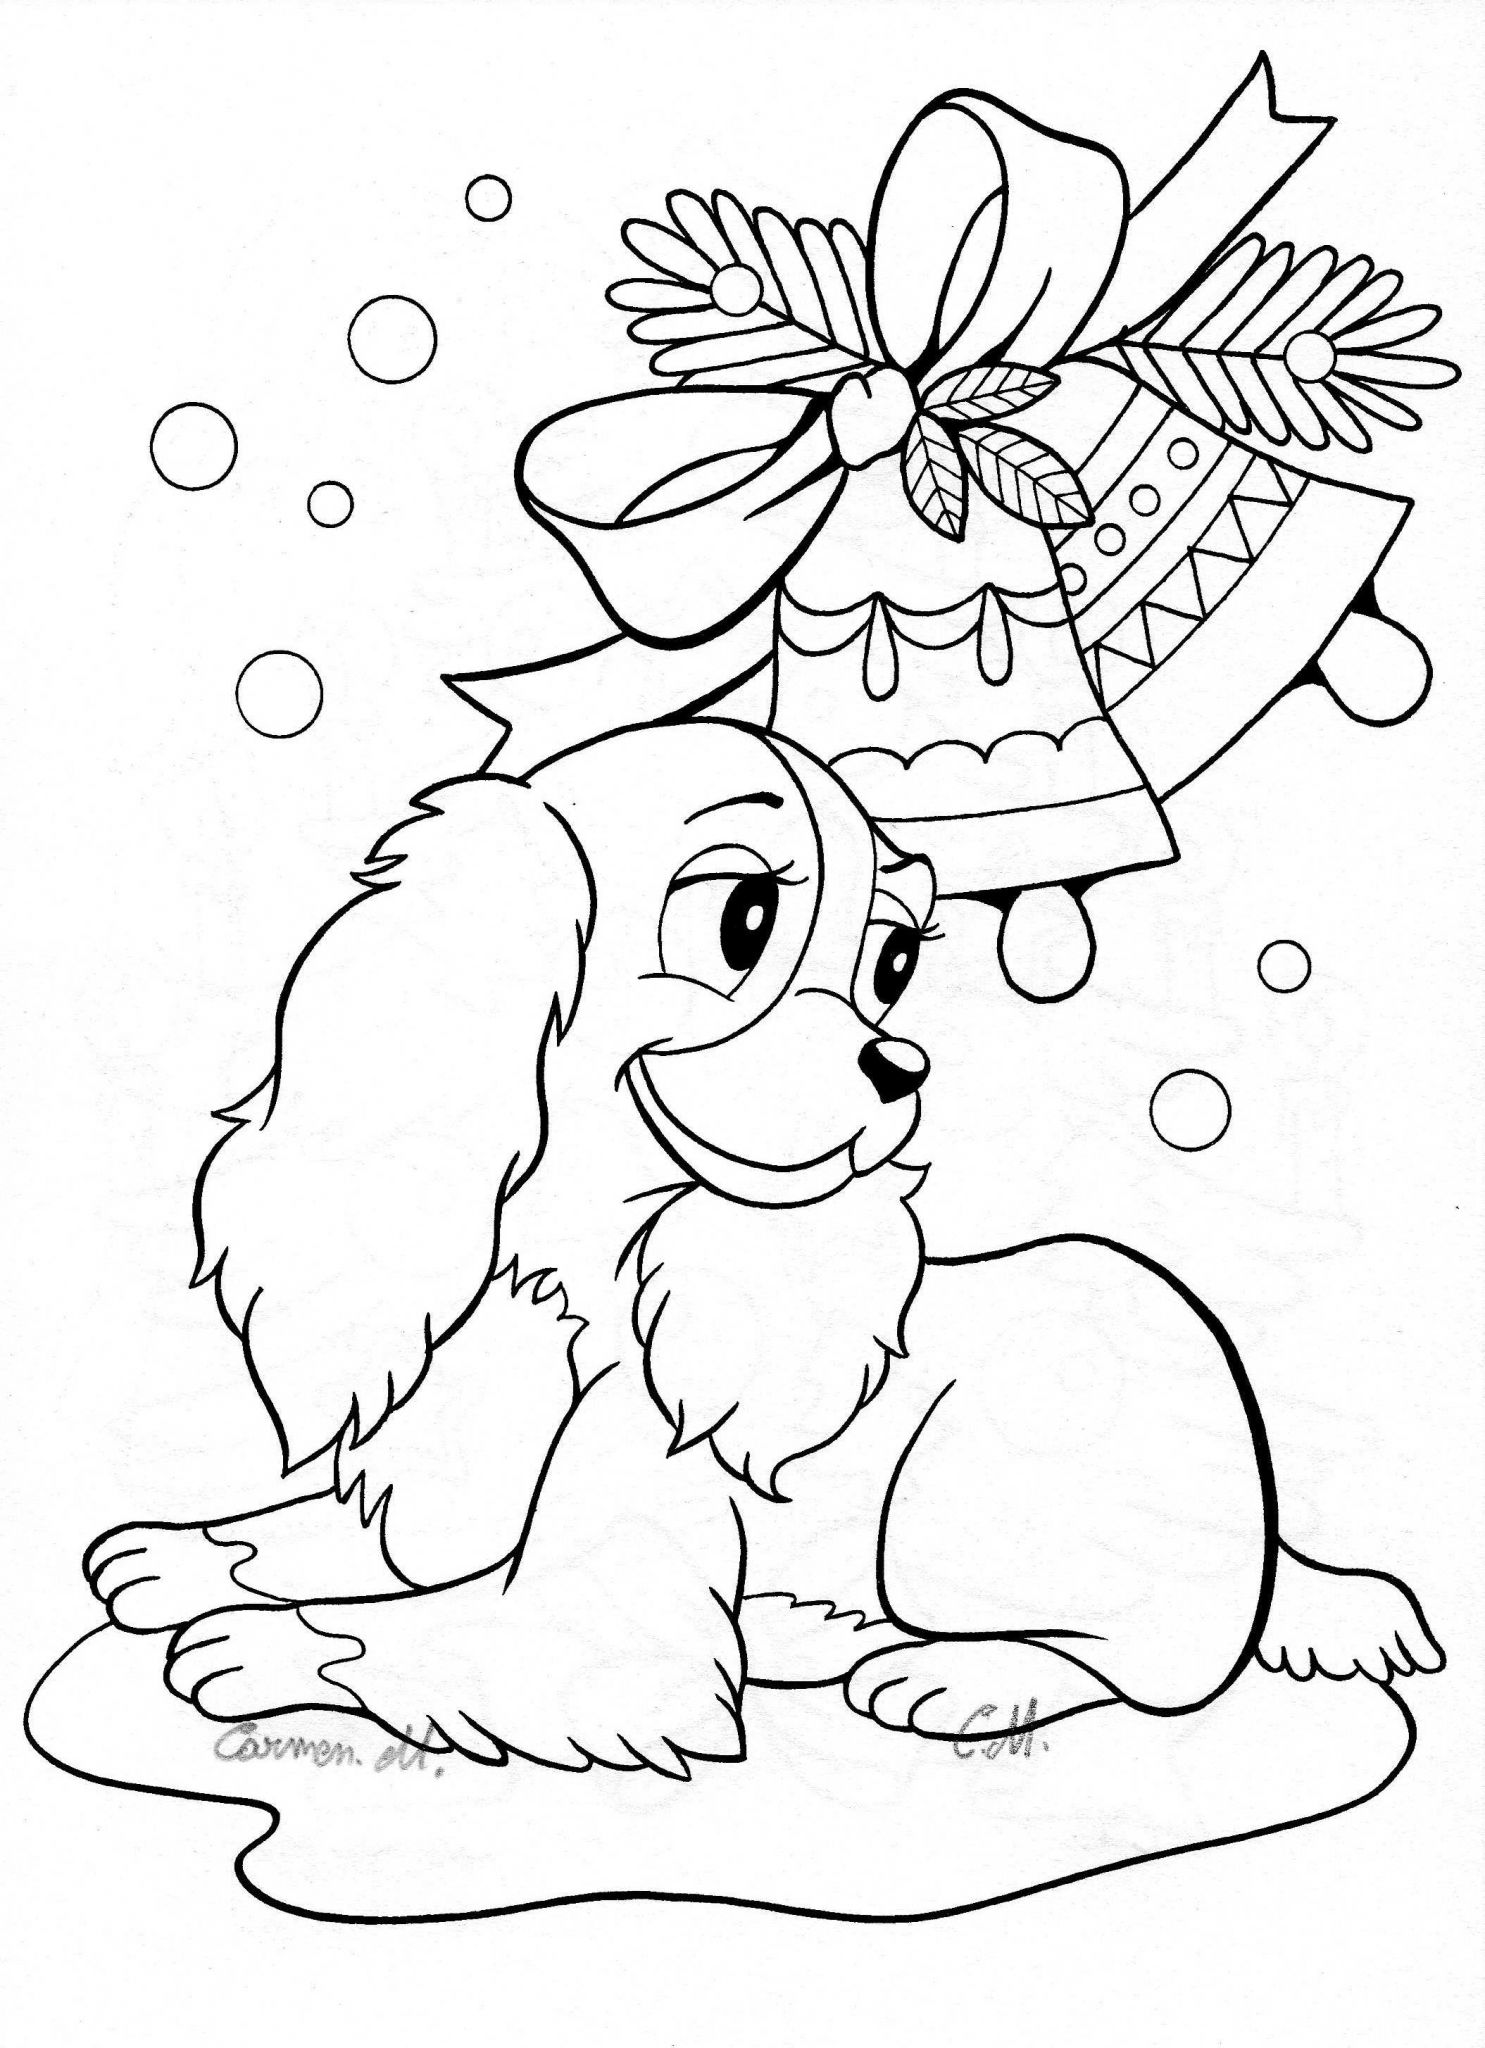 Animal Adaptations Worksheets together with 18lovely Free Animal Coloring Pages Clip Arts & Coloring Pages